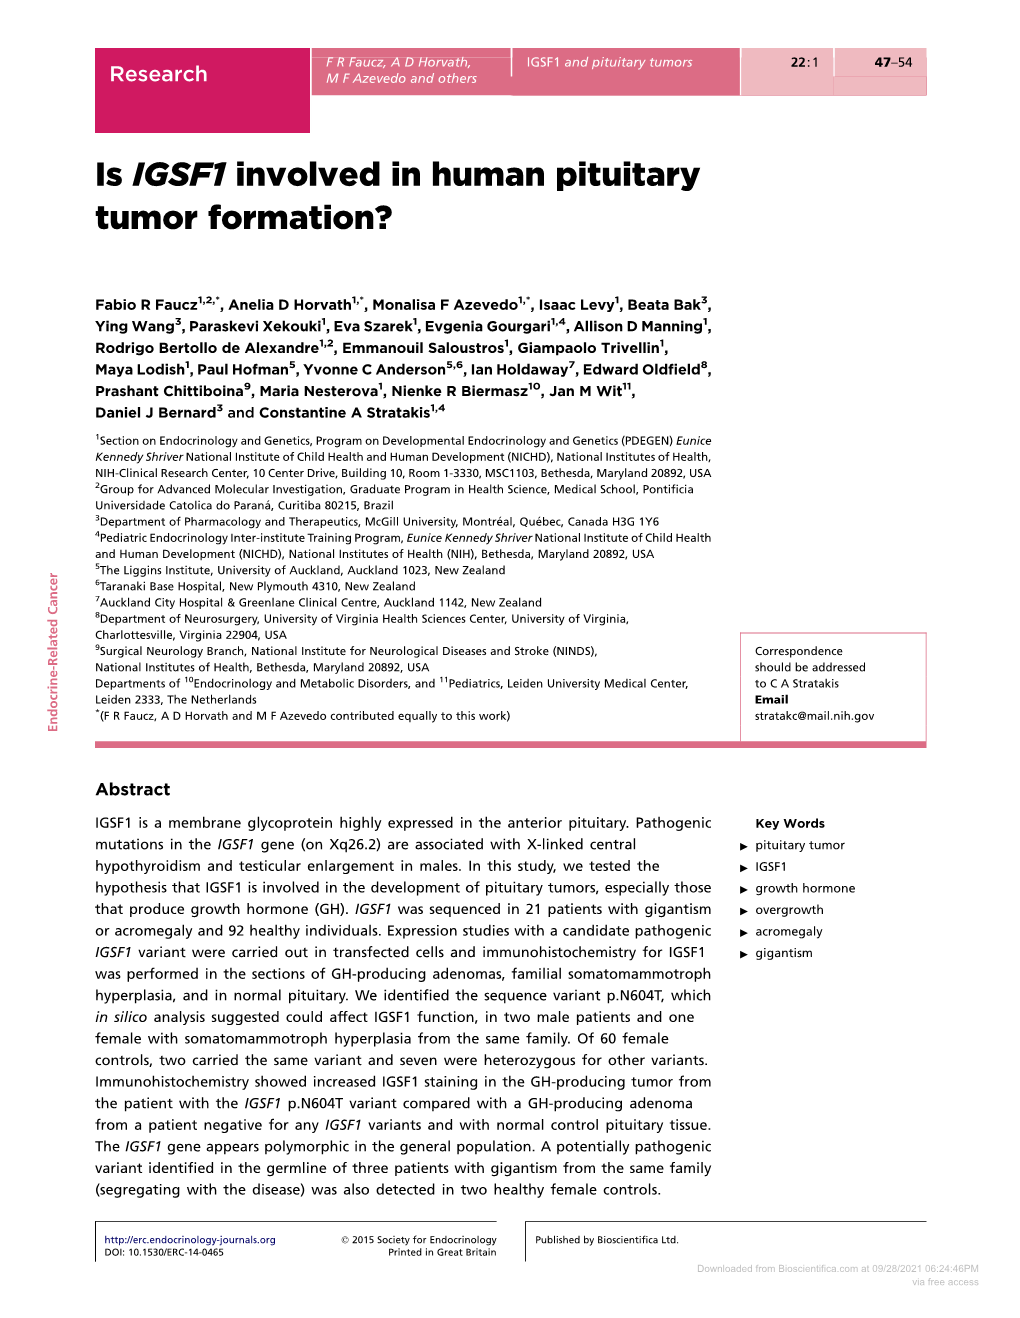 Is IGSF1 Involved in Human Pituitary Tumor Formation?